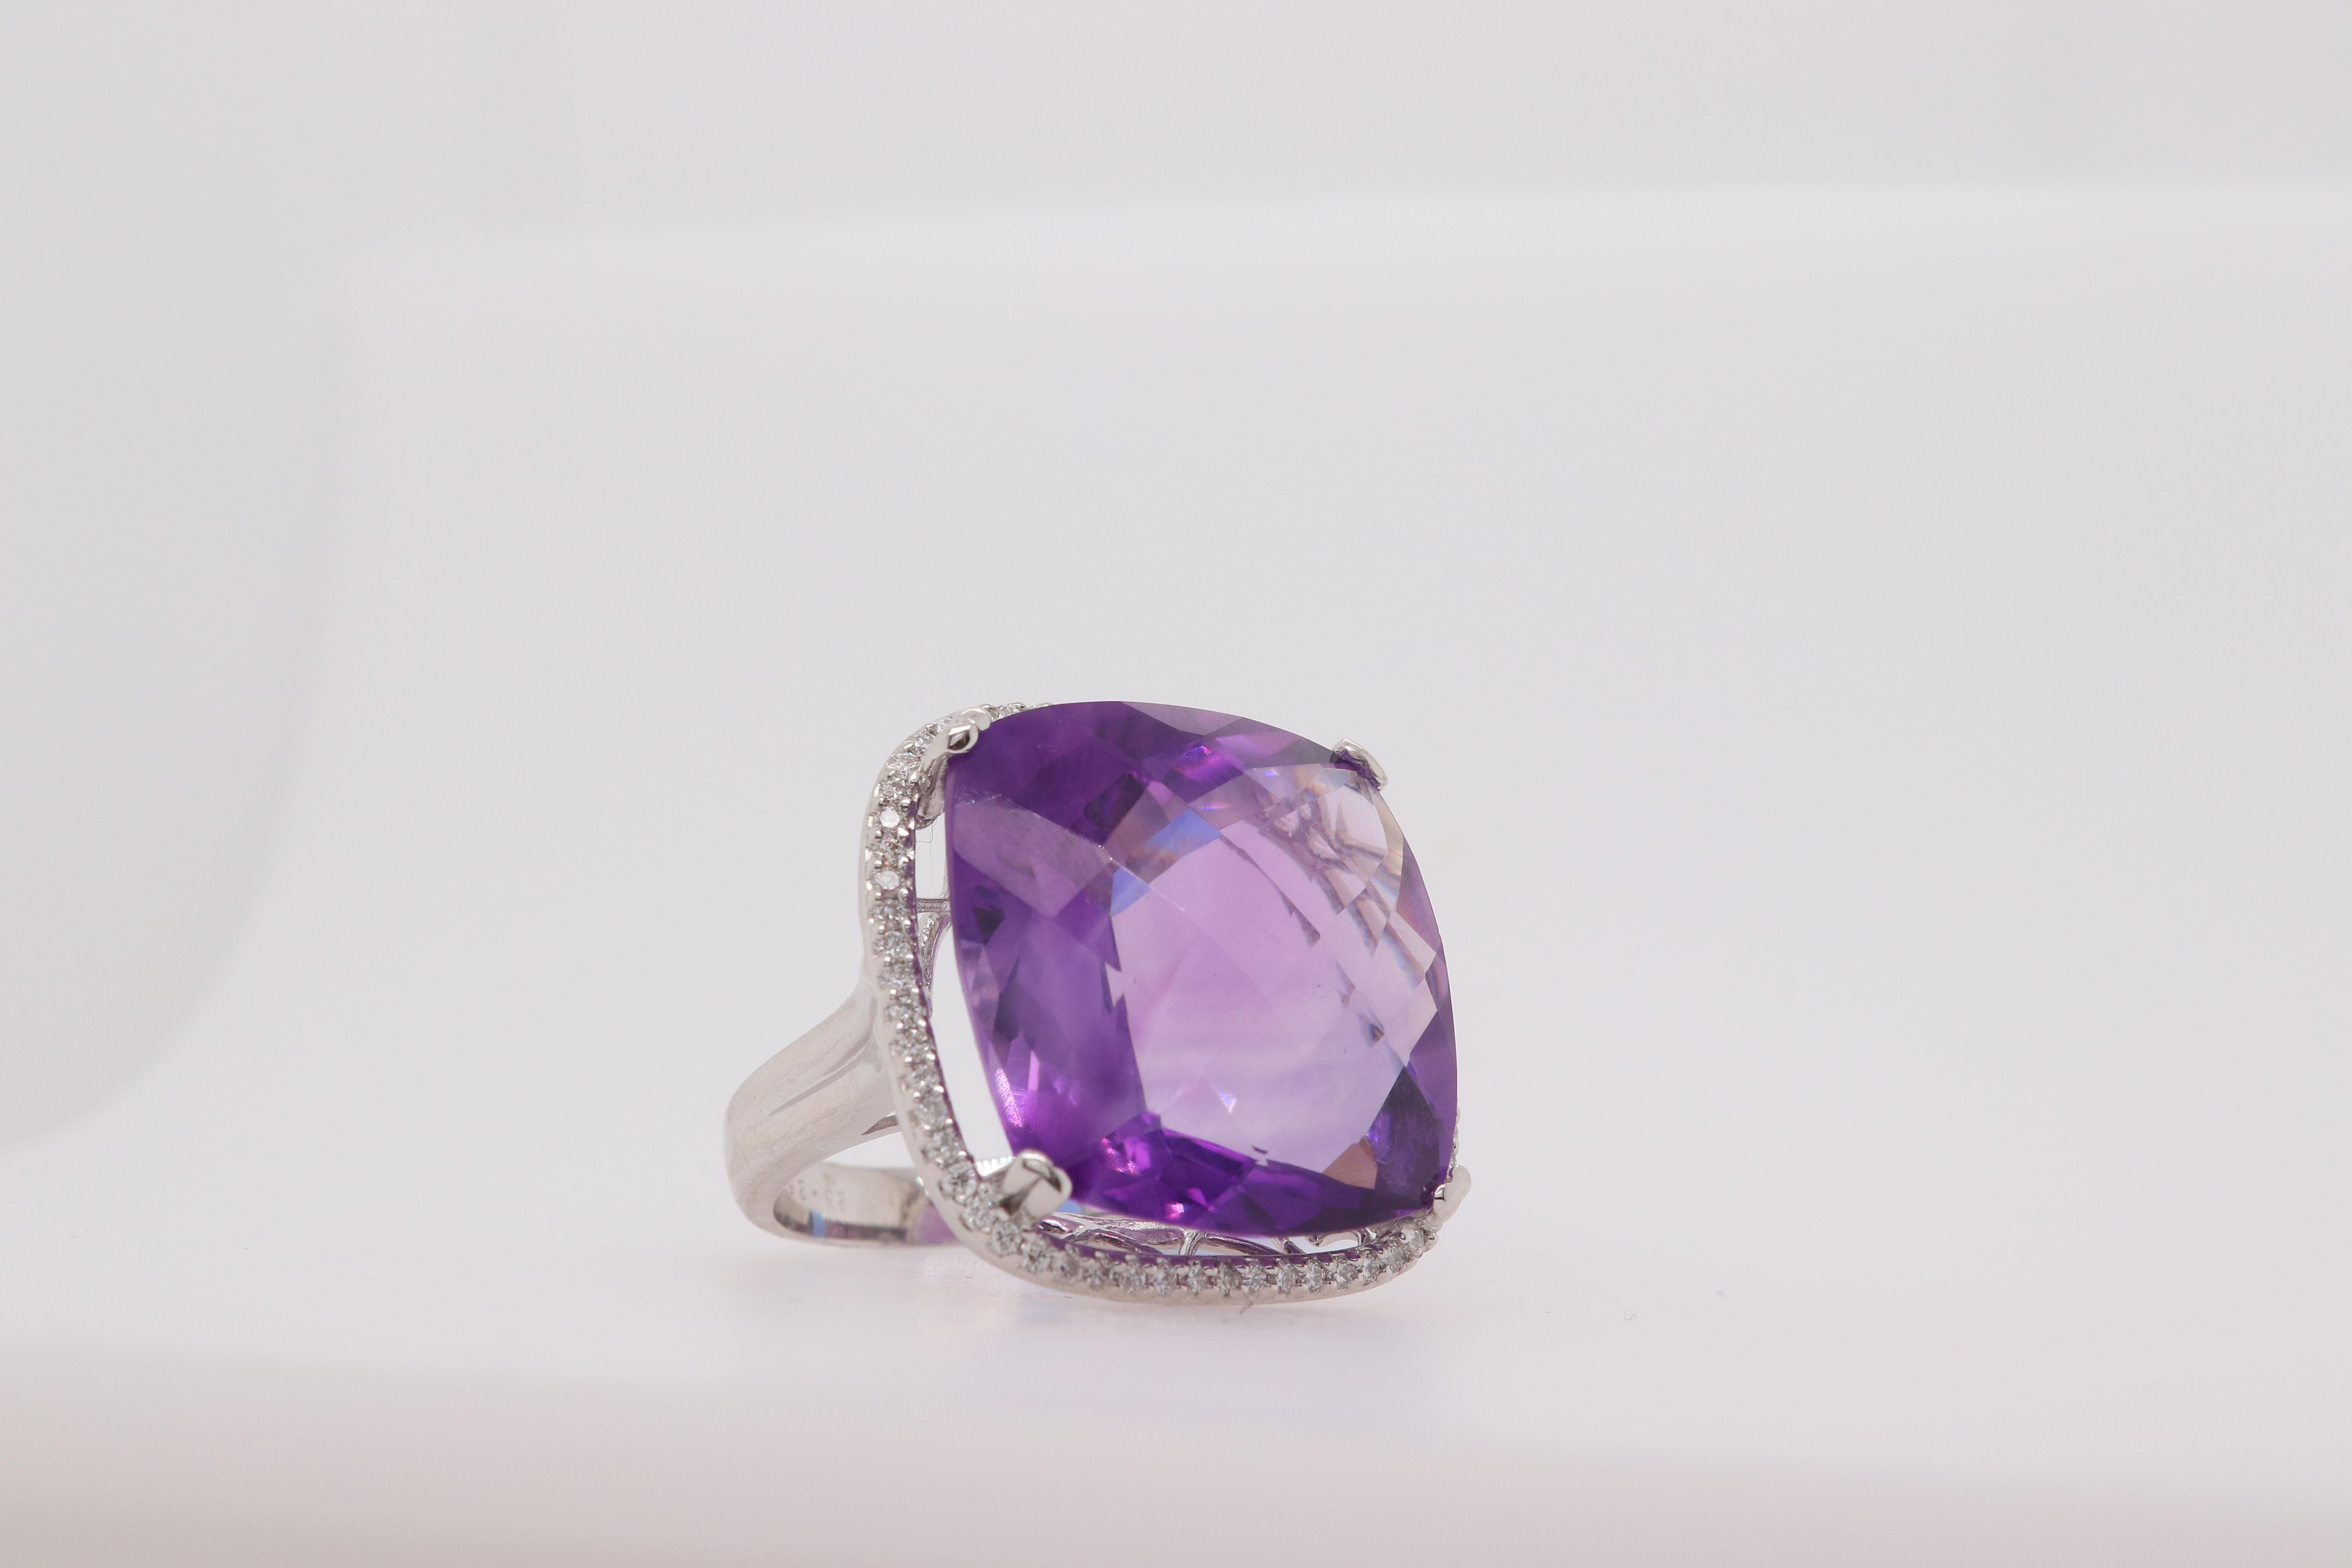 A uniquely large purple amethyst cocktail ring.

Material: 14k White Gold 
Stone Details: 1 Cushion Amethyst at 23.25 Carats Measuring at 19mm
Mounting Stone Details: 60 Brilliant Round Diamonds at 0.38 Carats
Ring Size: 6.5. Alberto offers